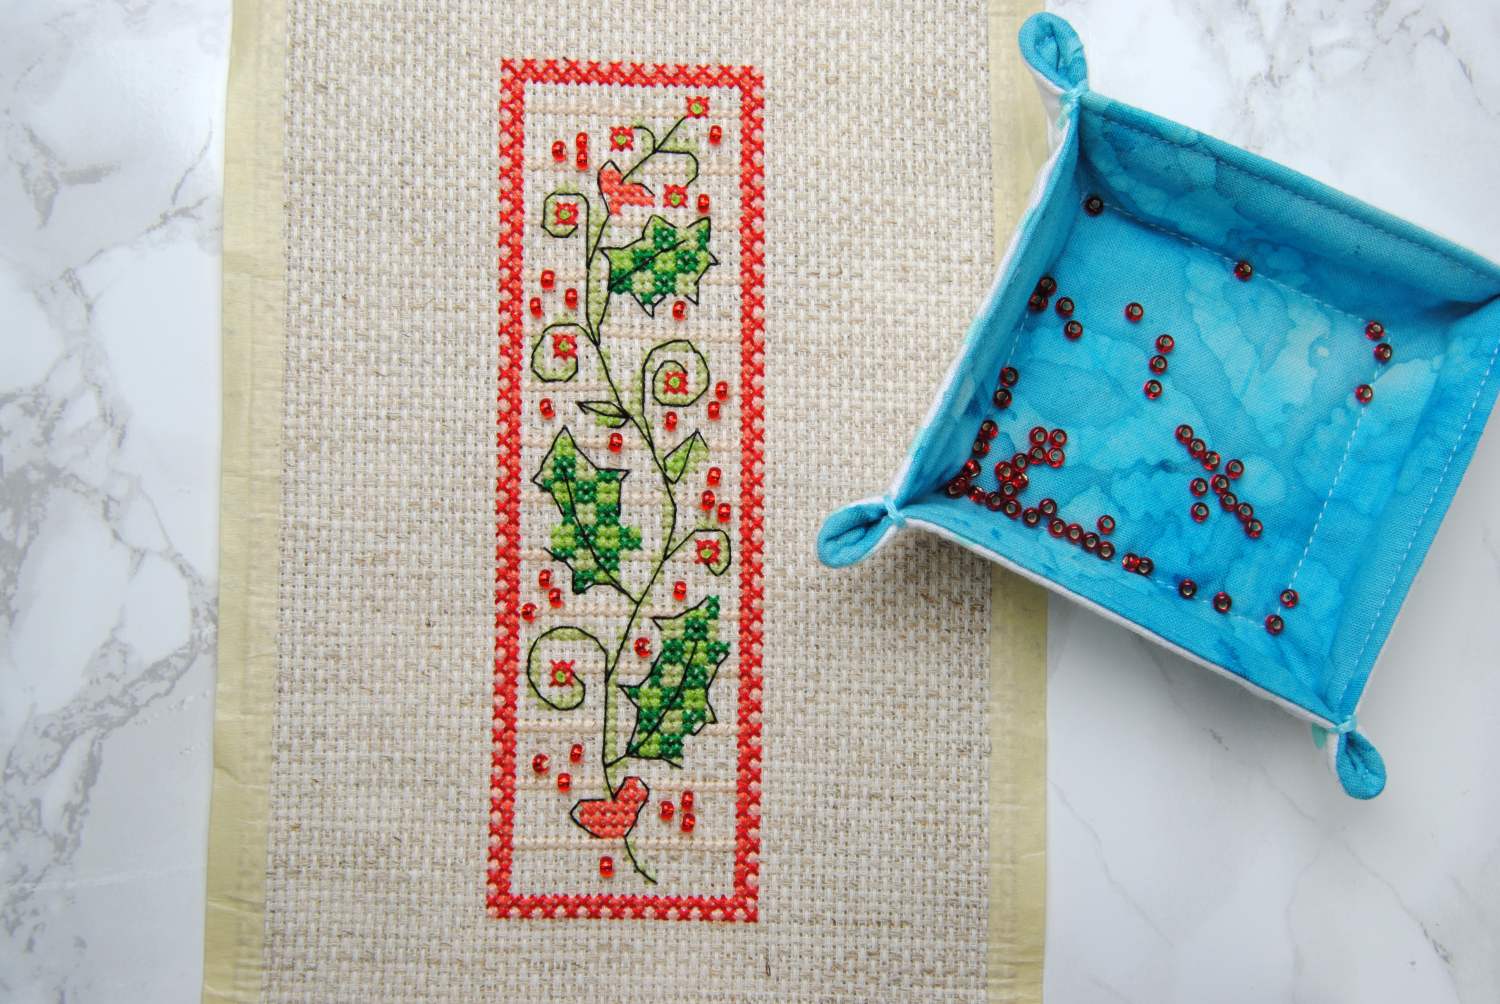 Beads: Accenting your Cross Stitch Projects with flair and sparkle.